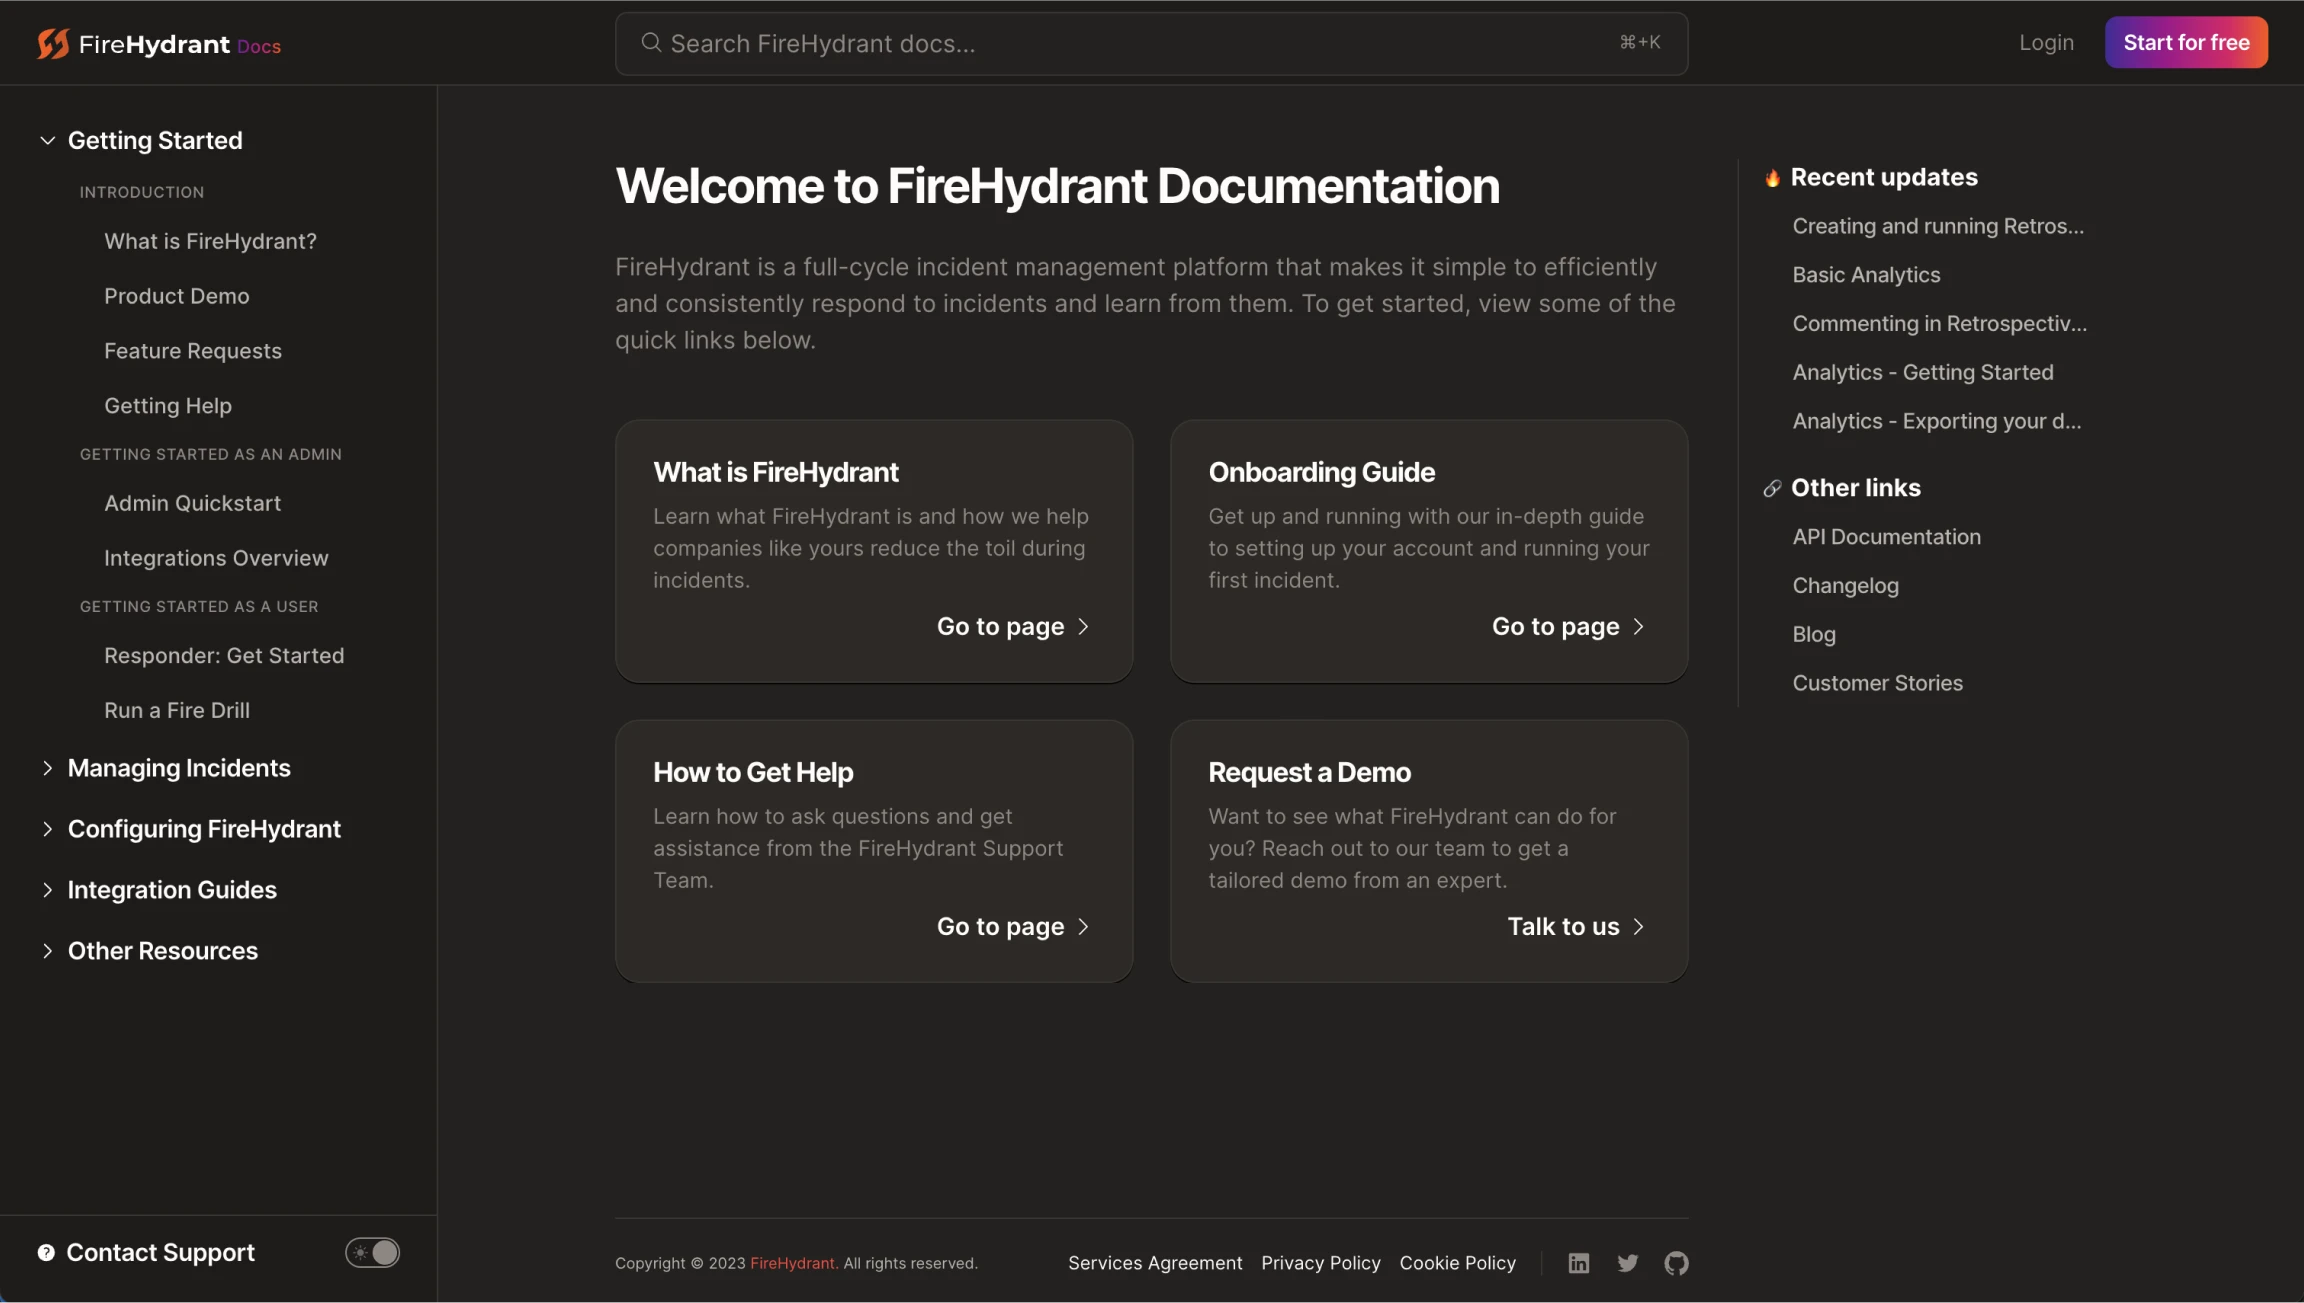 FireHydrant's Documentation site homepage